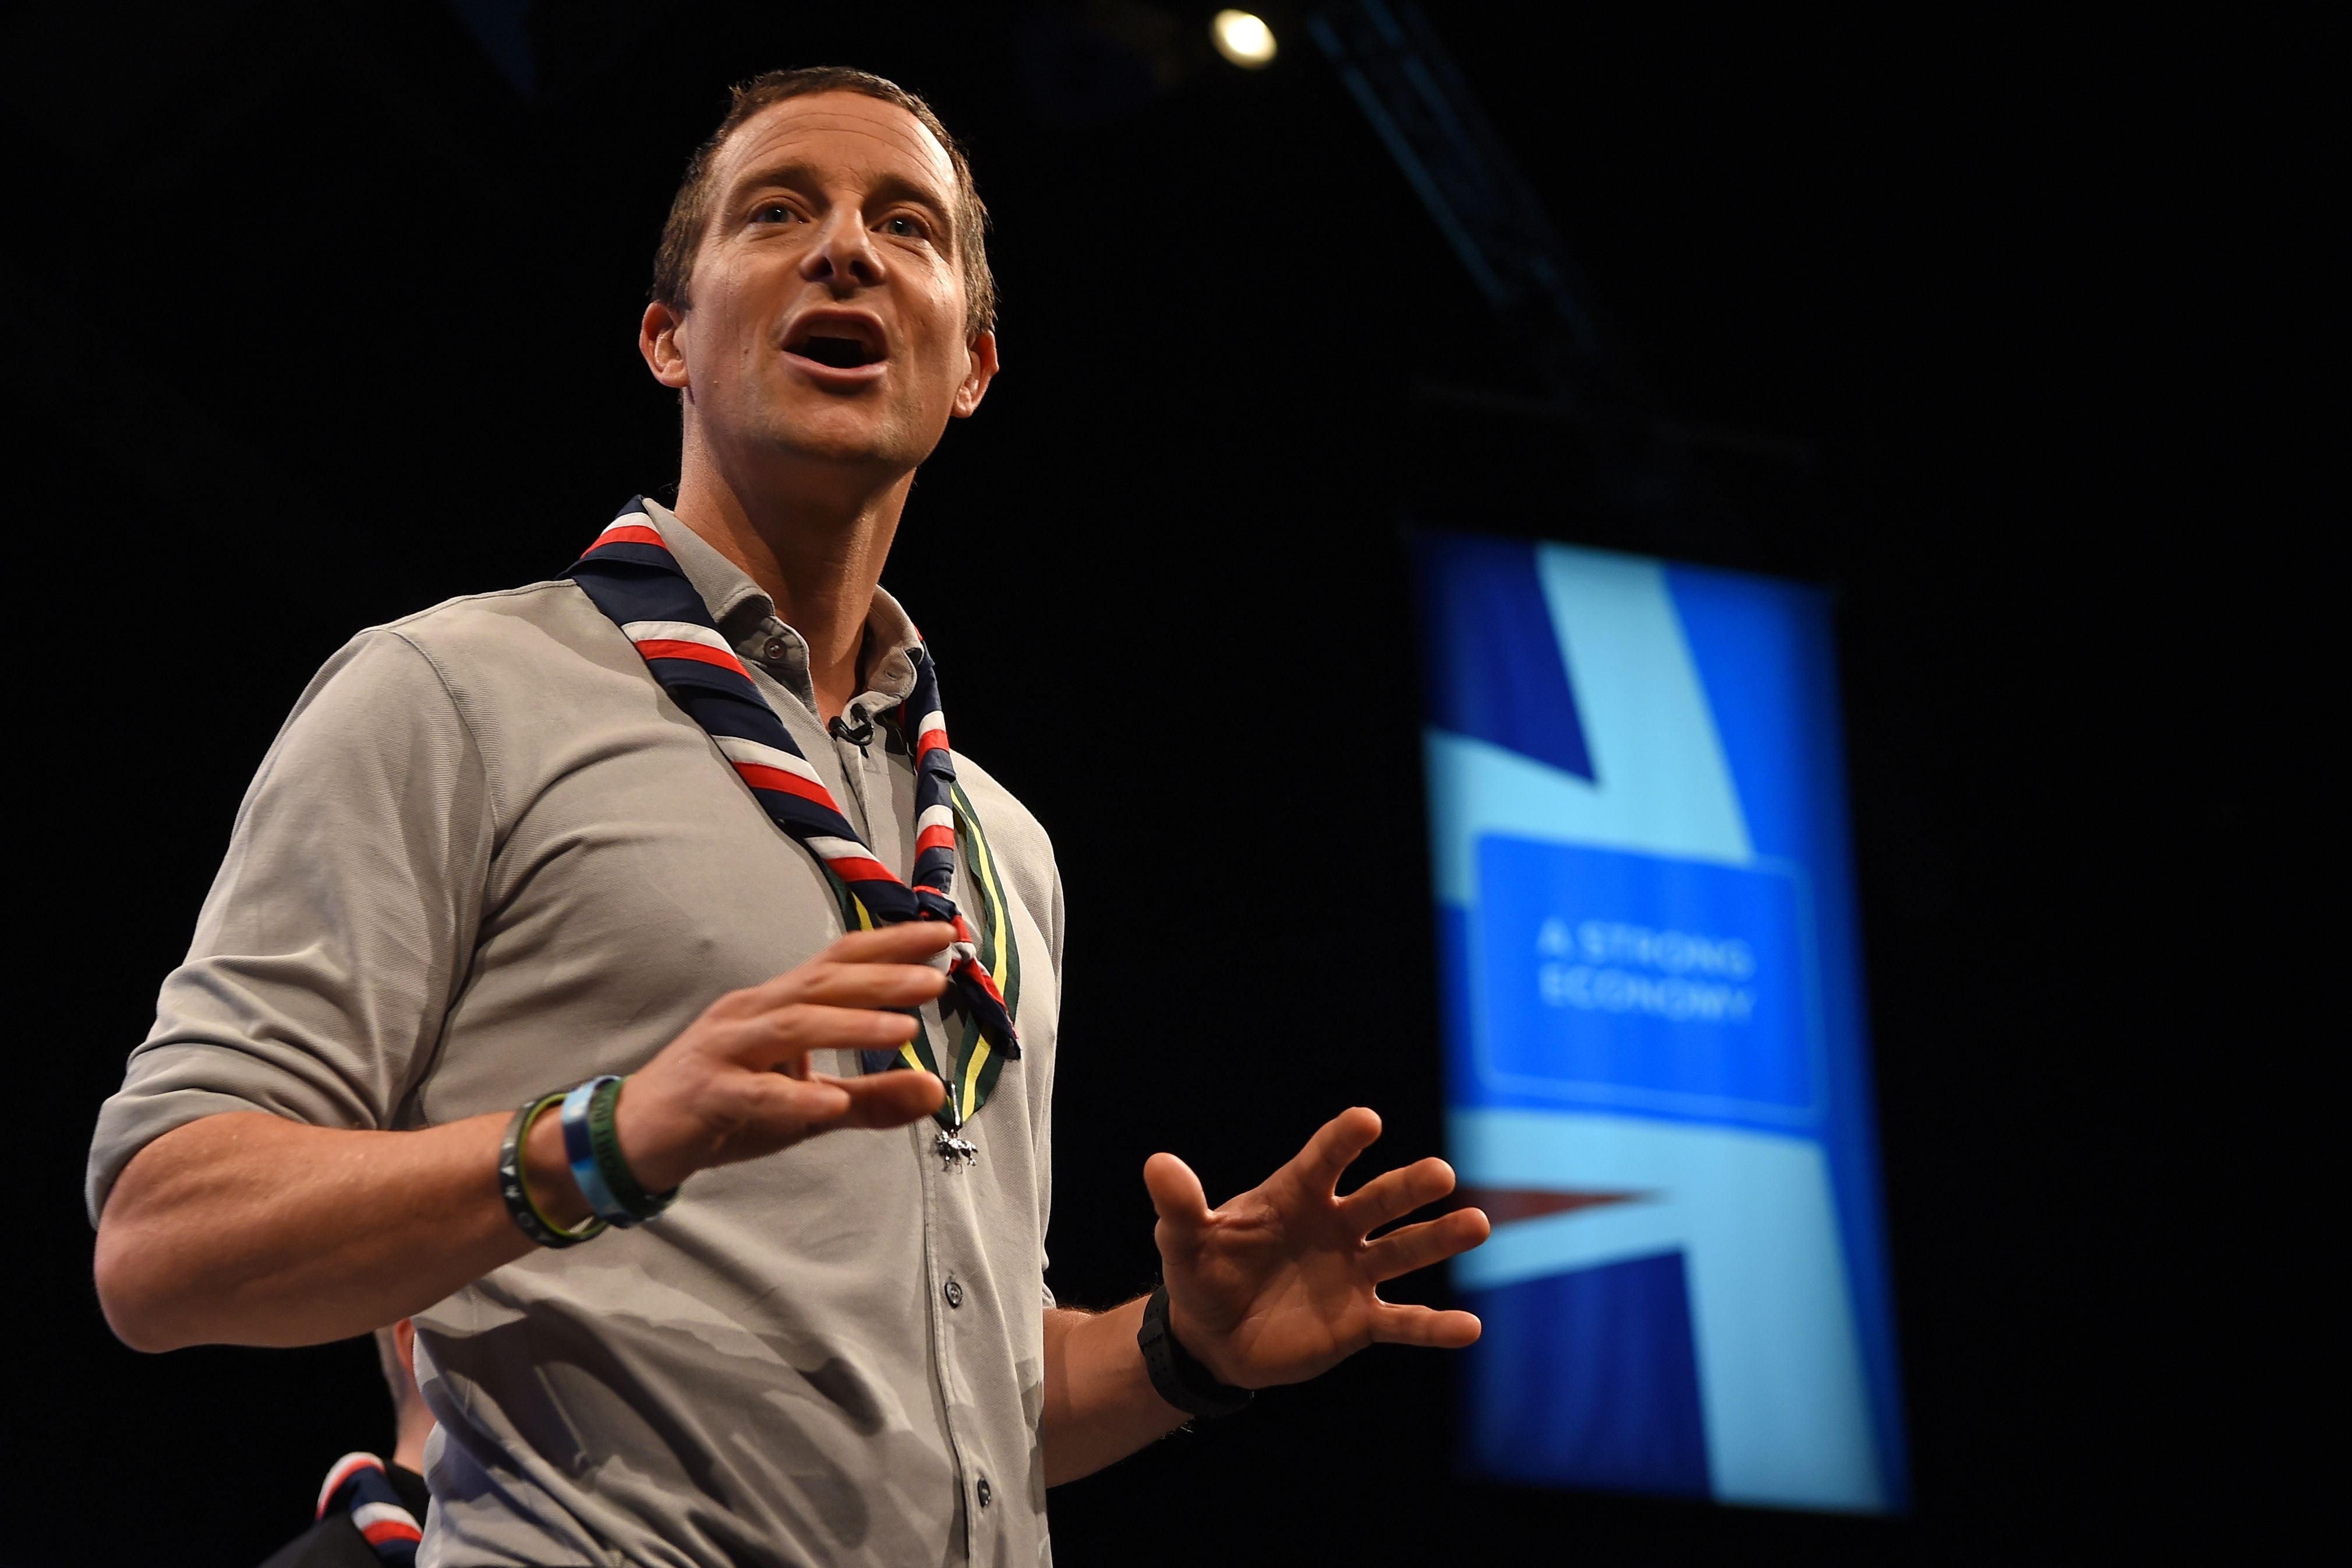 Bear Grylls said being Chief Scout was the ‘honour of a lifetime’